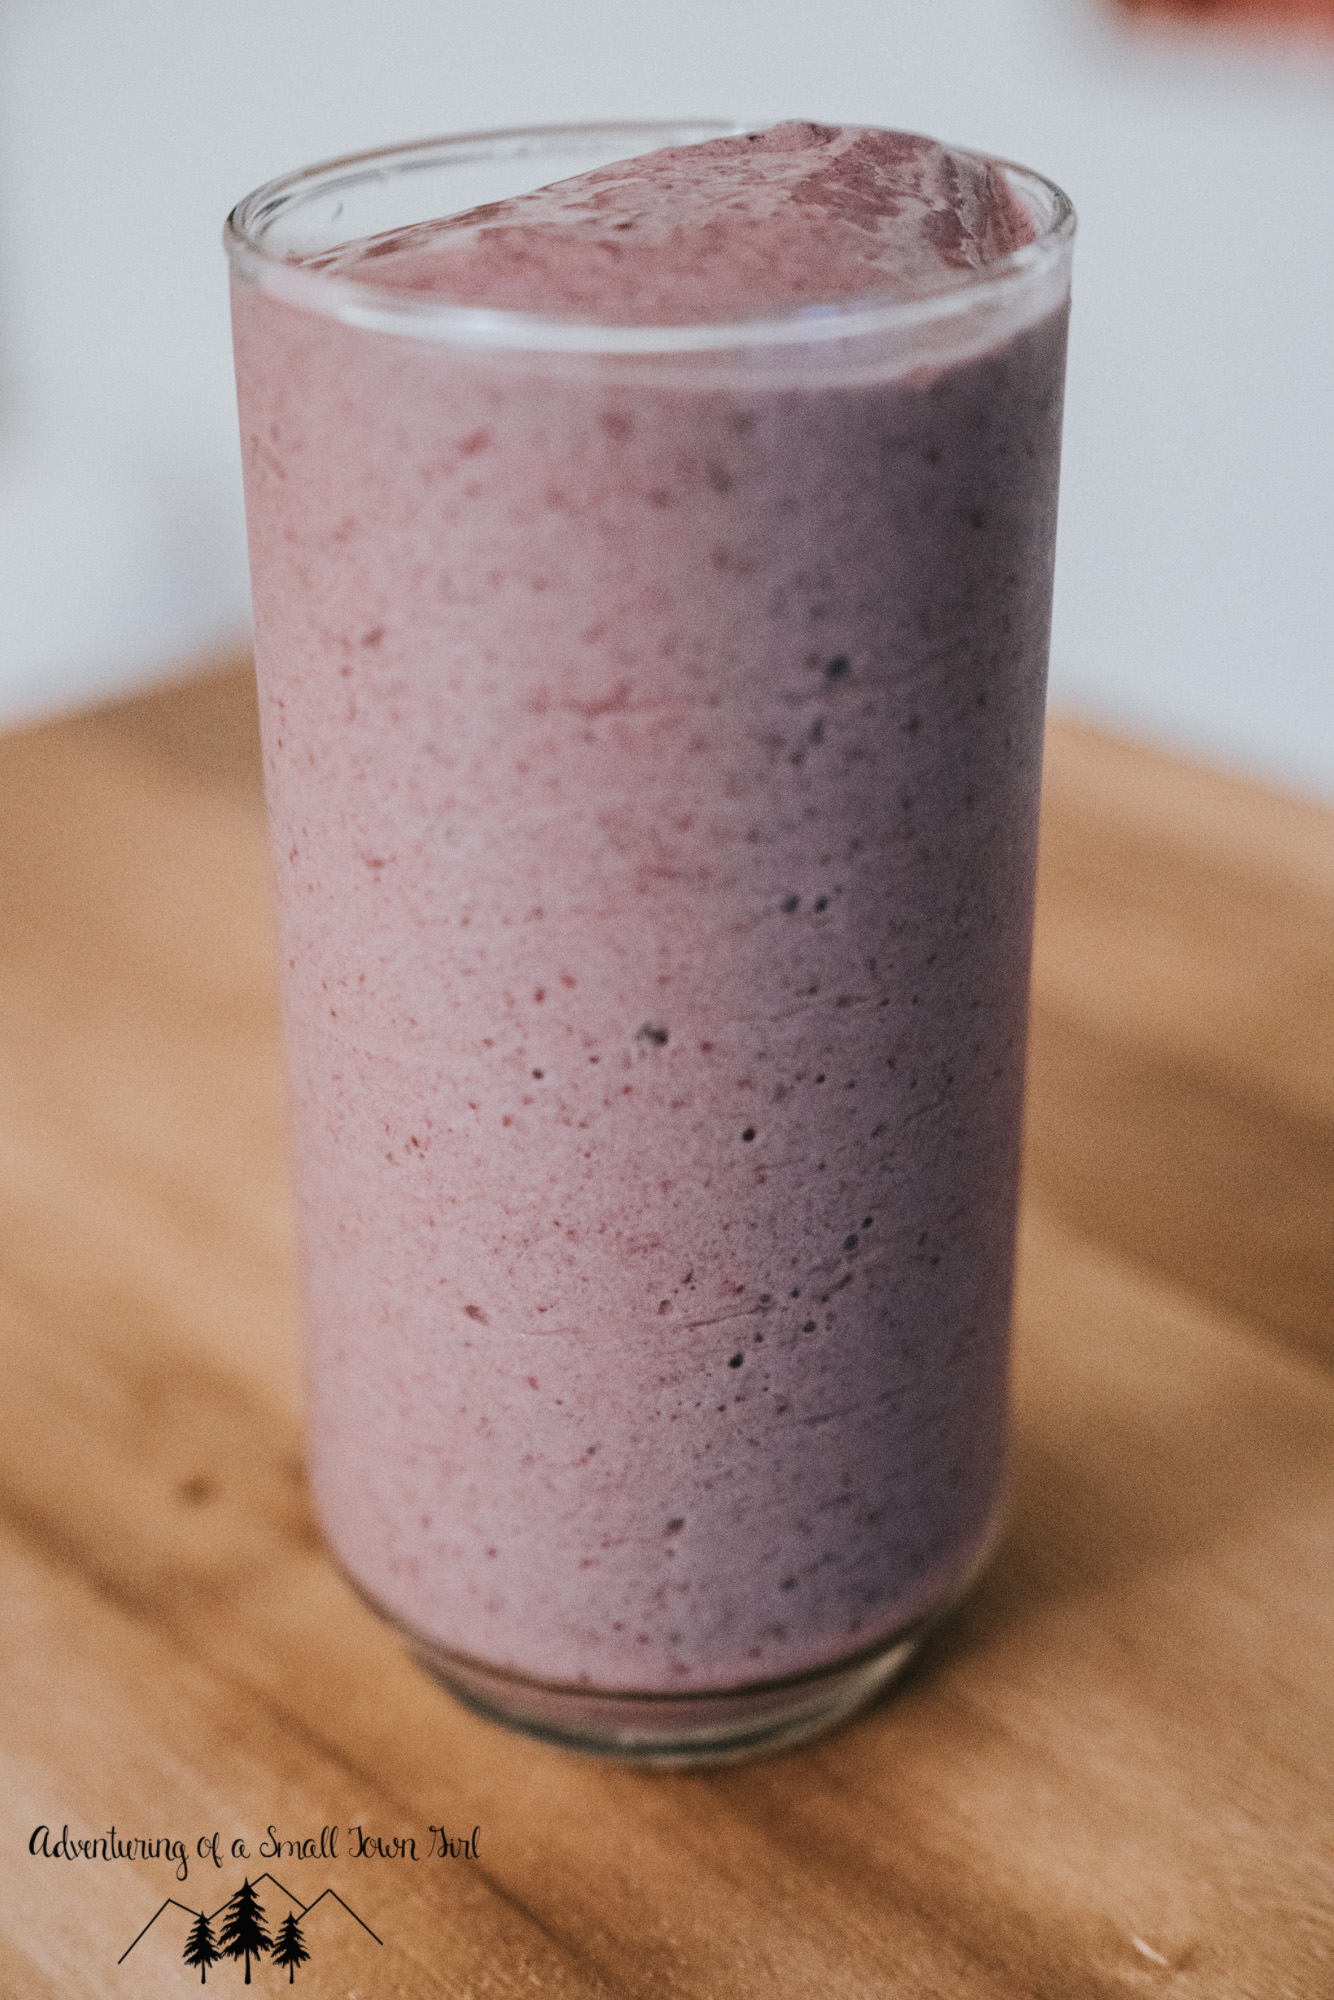 5 Ingredient Blackberry Smoothie Recipe by Adventuring of a Small Town Girl.jpg